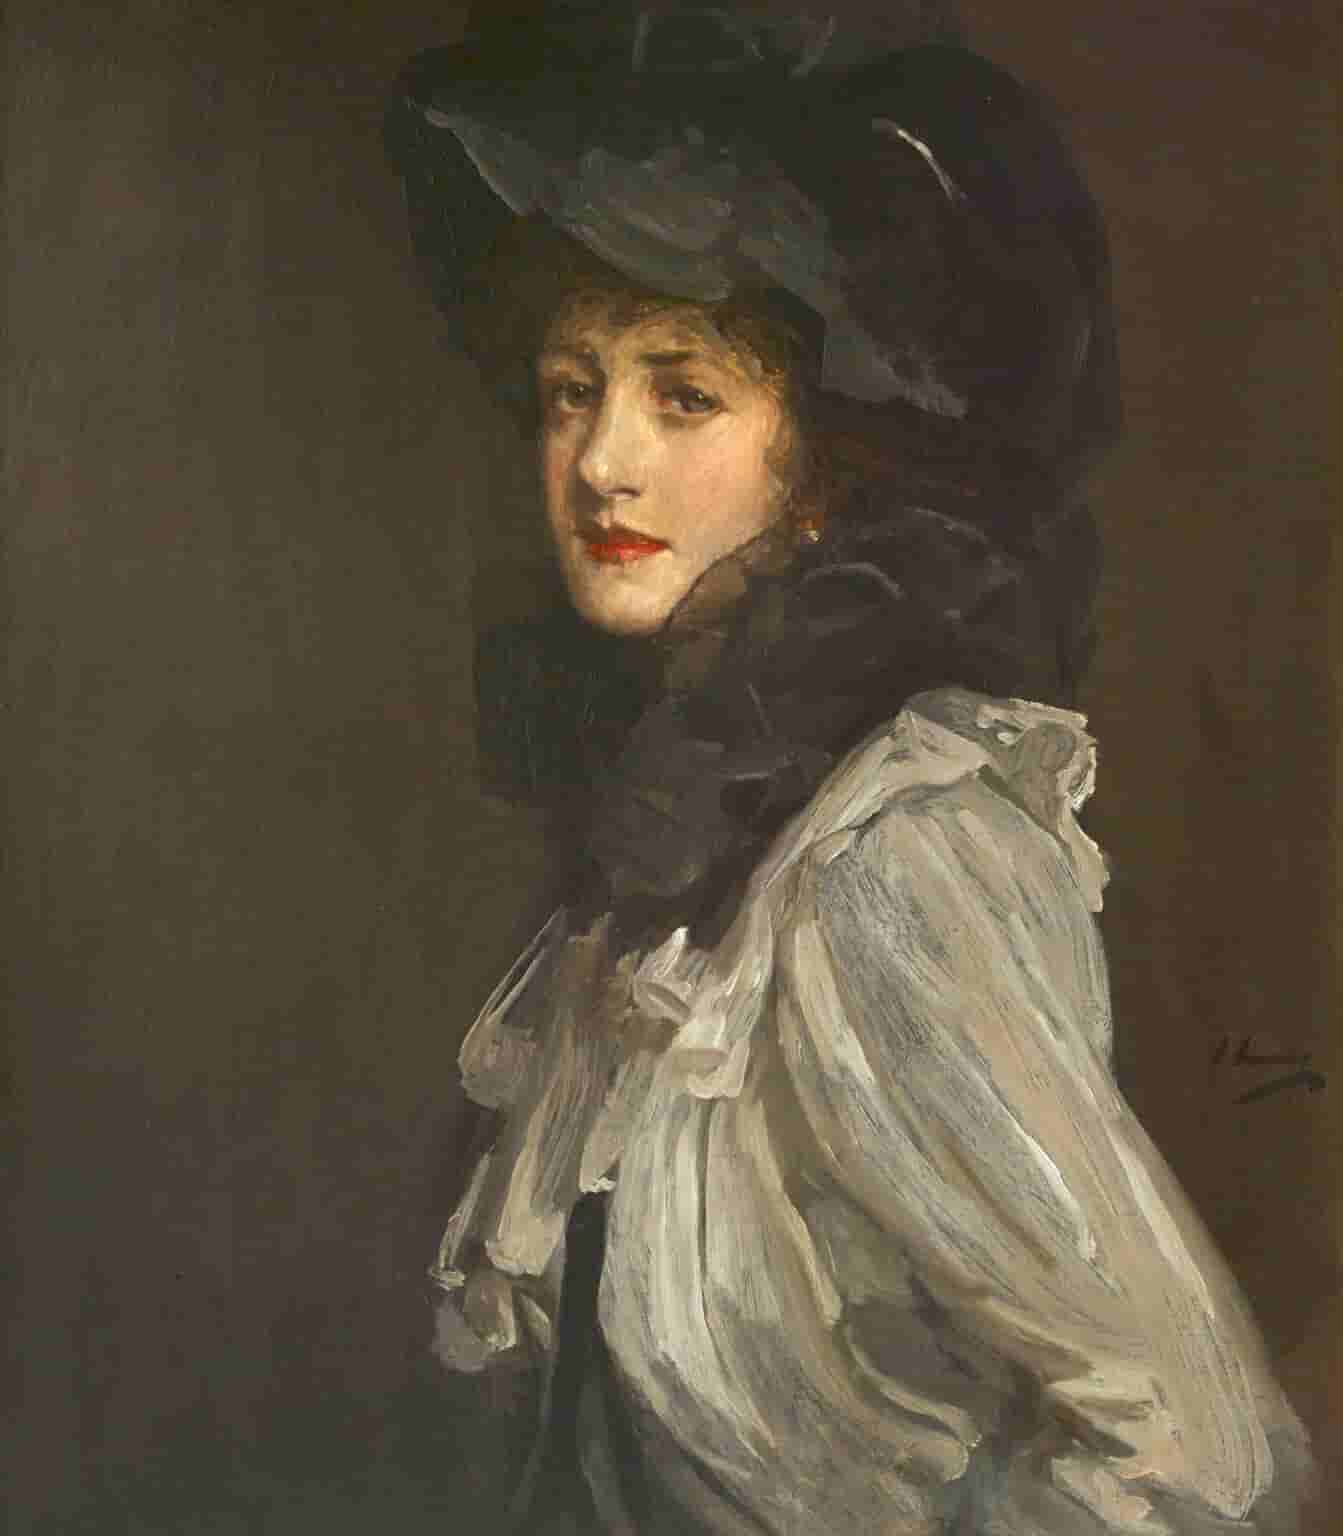 Sir John Lavery, Portrait of a Lady in Grey and Black, c.1902, Oil on Canvas